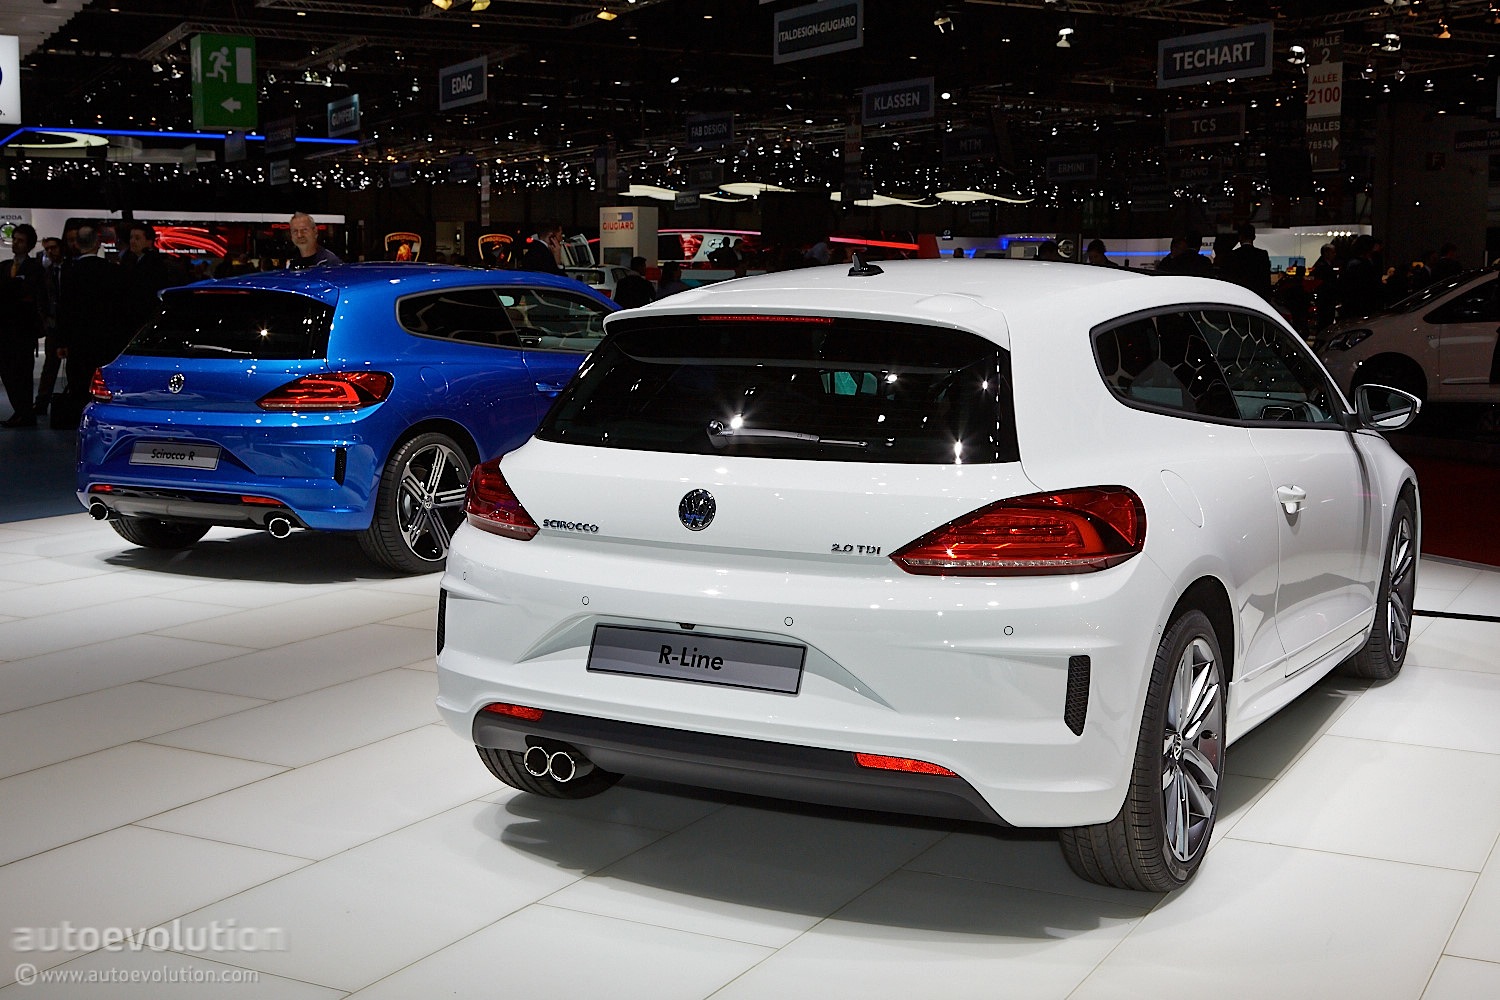 2014 VW Scirocco Facelift Launched in Britain: Pricing and Details